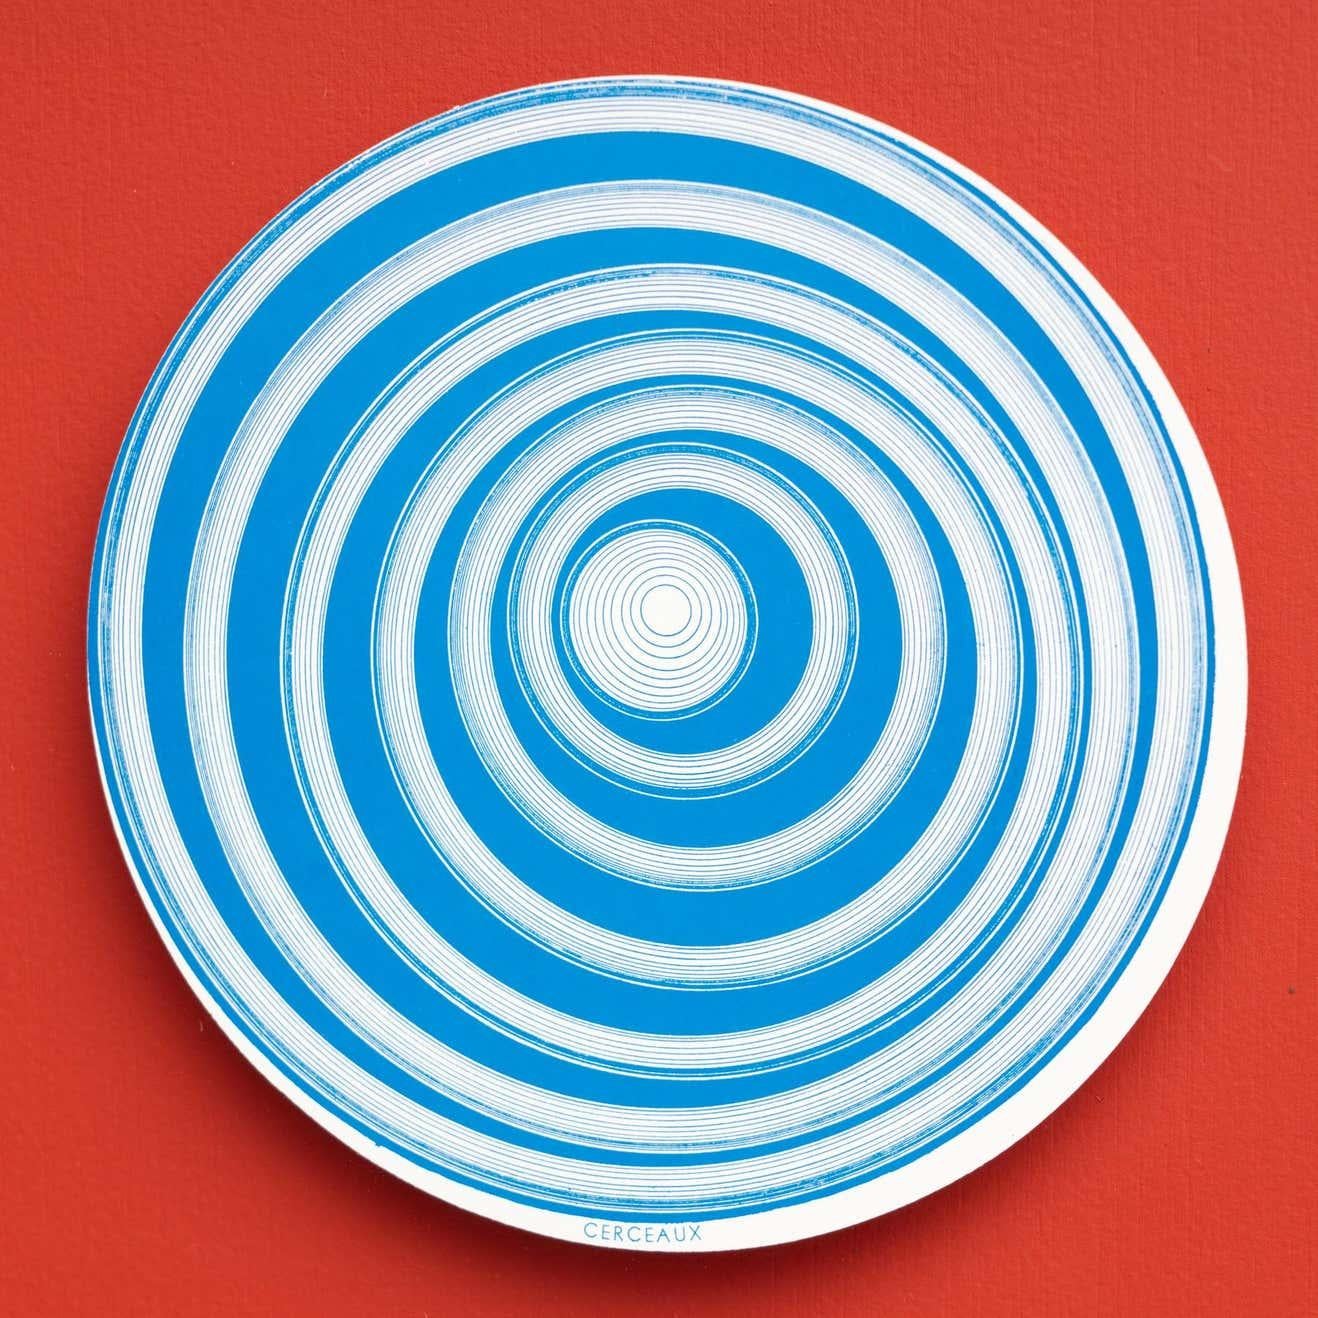 Embark on a visual journey with the Set of 6 Marcel Duchamp Rotoreliefs, a stunning edition framed in red by Konig Series 133 in 1987. This collection pays homage to Duchamp's iconic 1935 rotoreliefs, presenting a beautiful reprint on six round